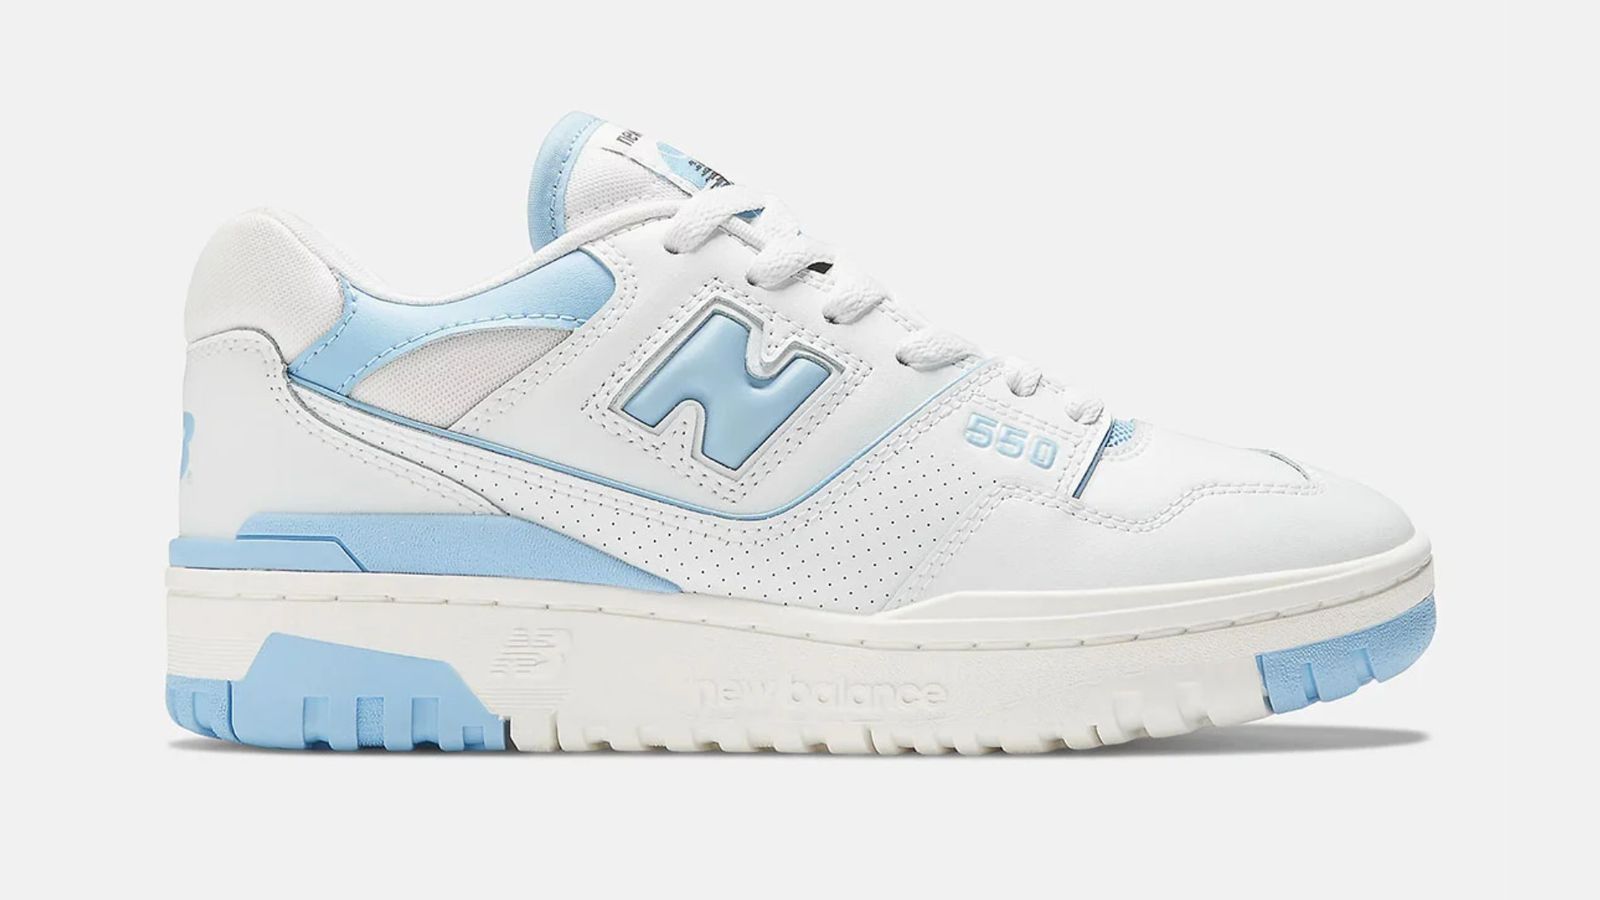 New Balance 550 "White Sky Blue" product image of a white low-top sneaker featuring light blue details, including "N" branding on the side.